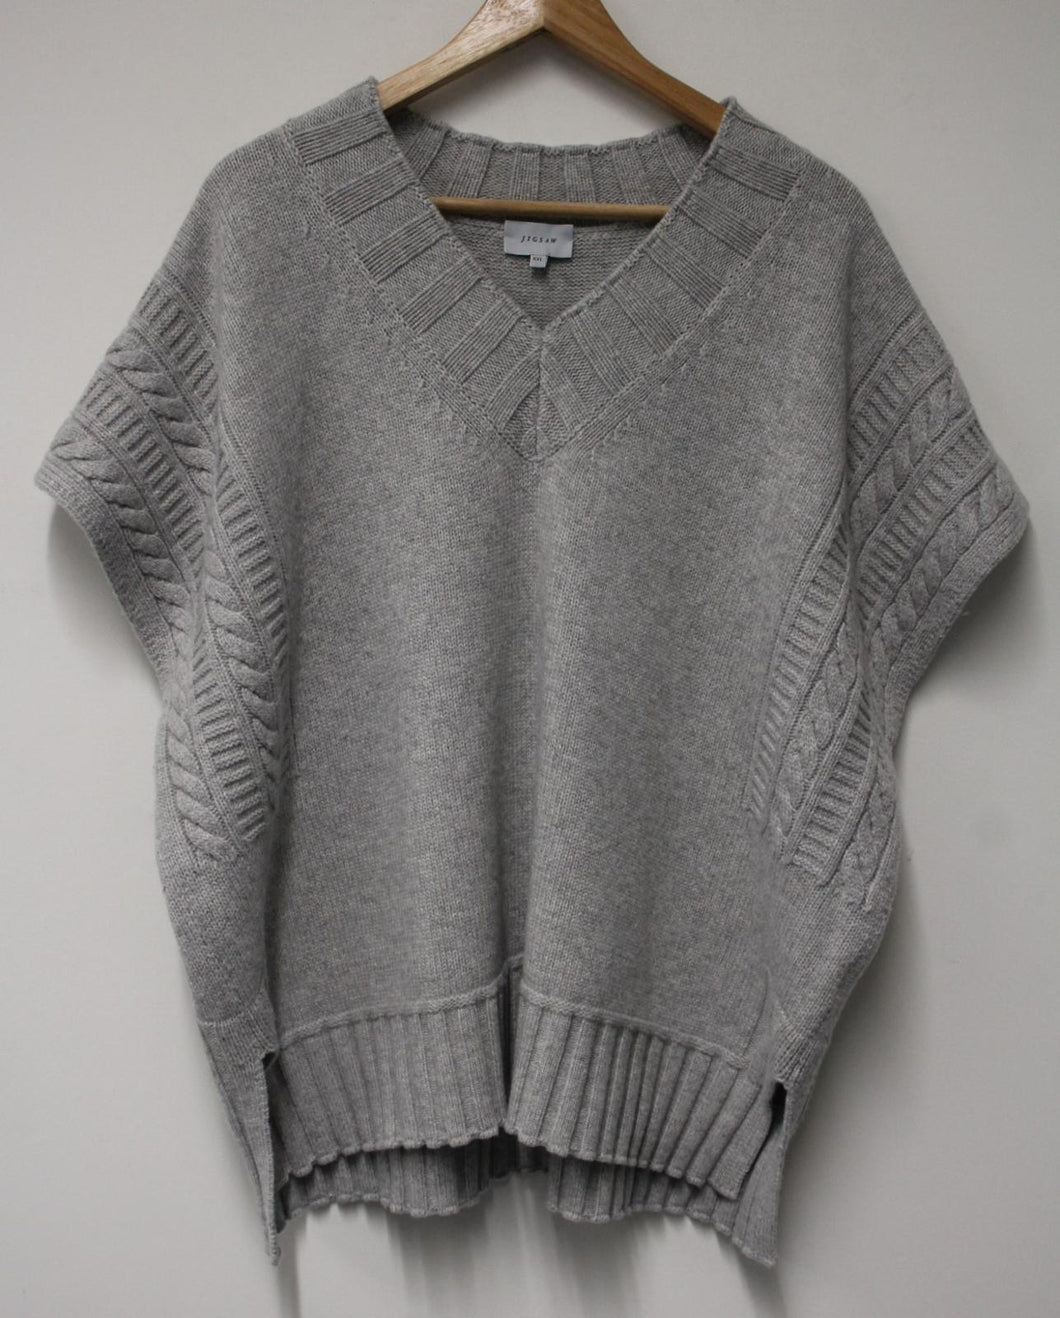 JIGSAW Ladies Pale Grey Wool/Cashmere Blend Cable Knit Sleeveless Pullover XXL